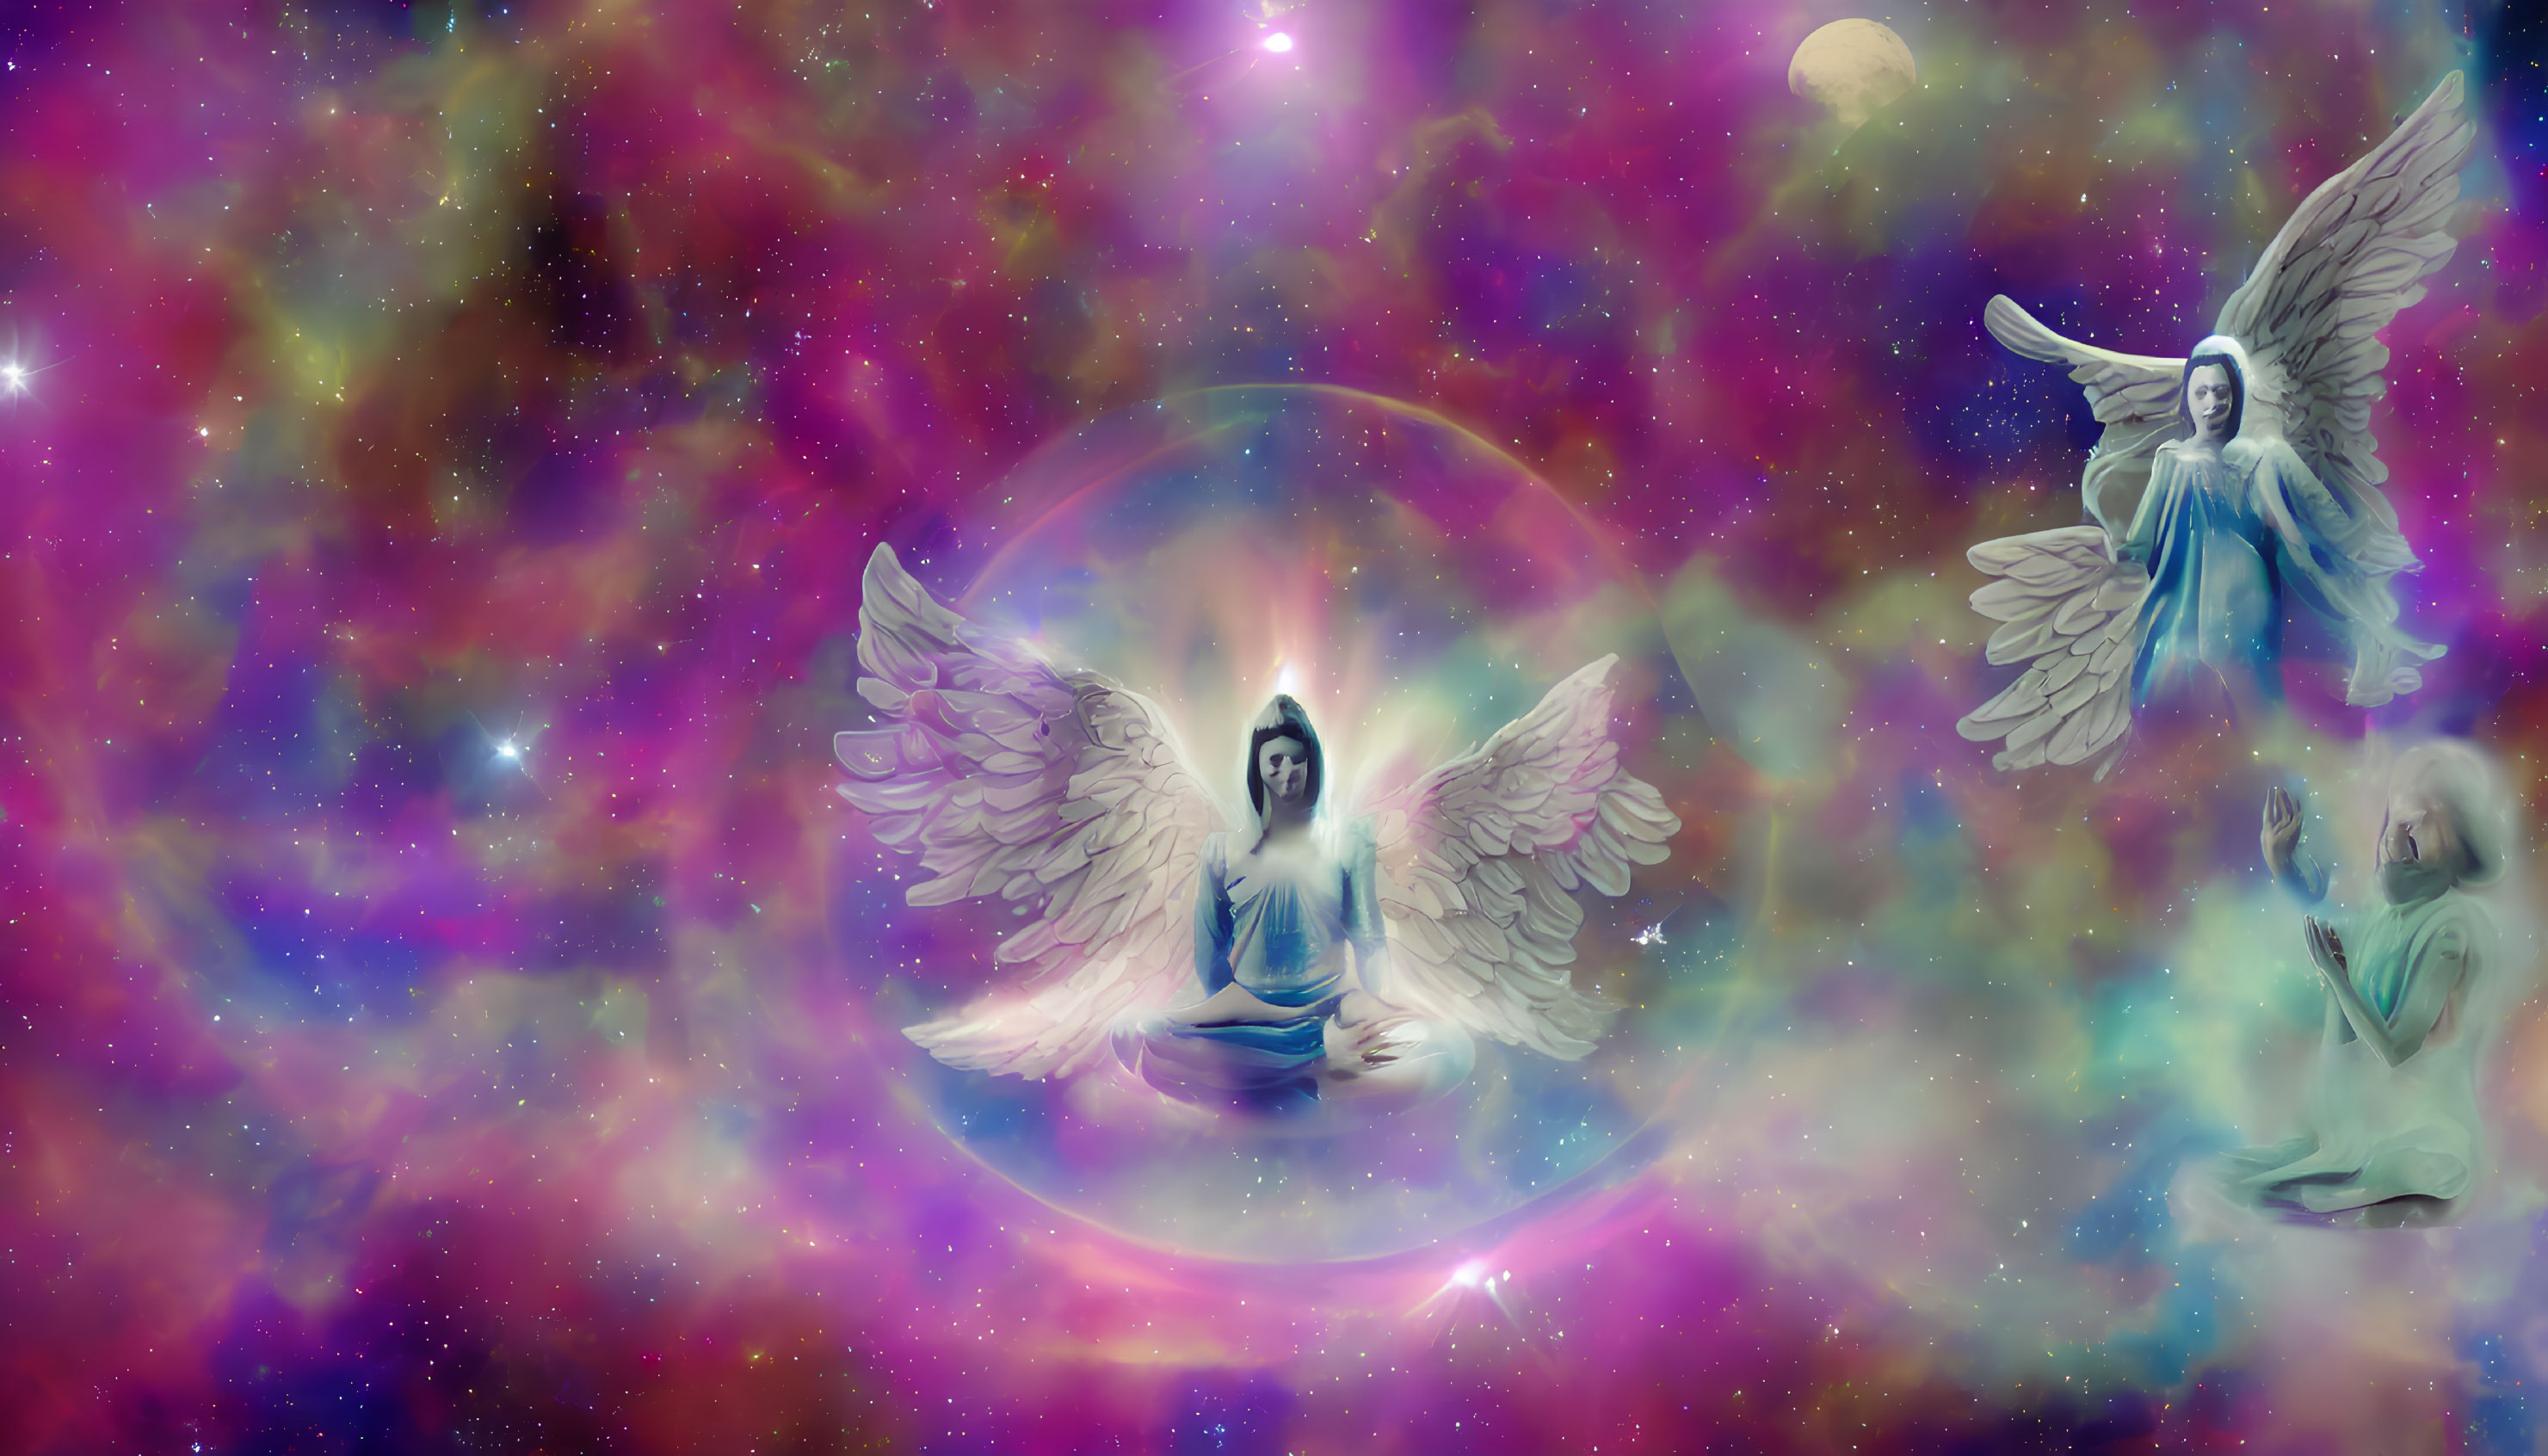 Celestial digital artwork: meditating figure with wings in bubble, surrounded by angelic statues, stars